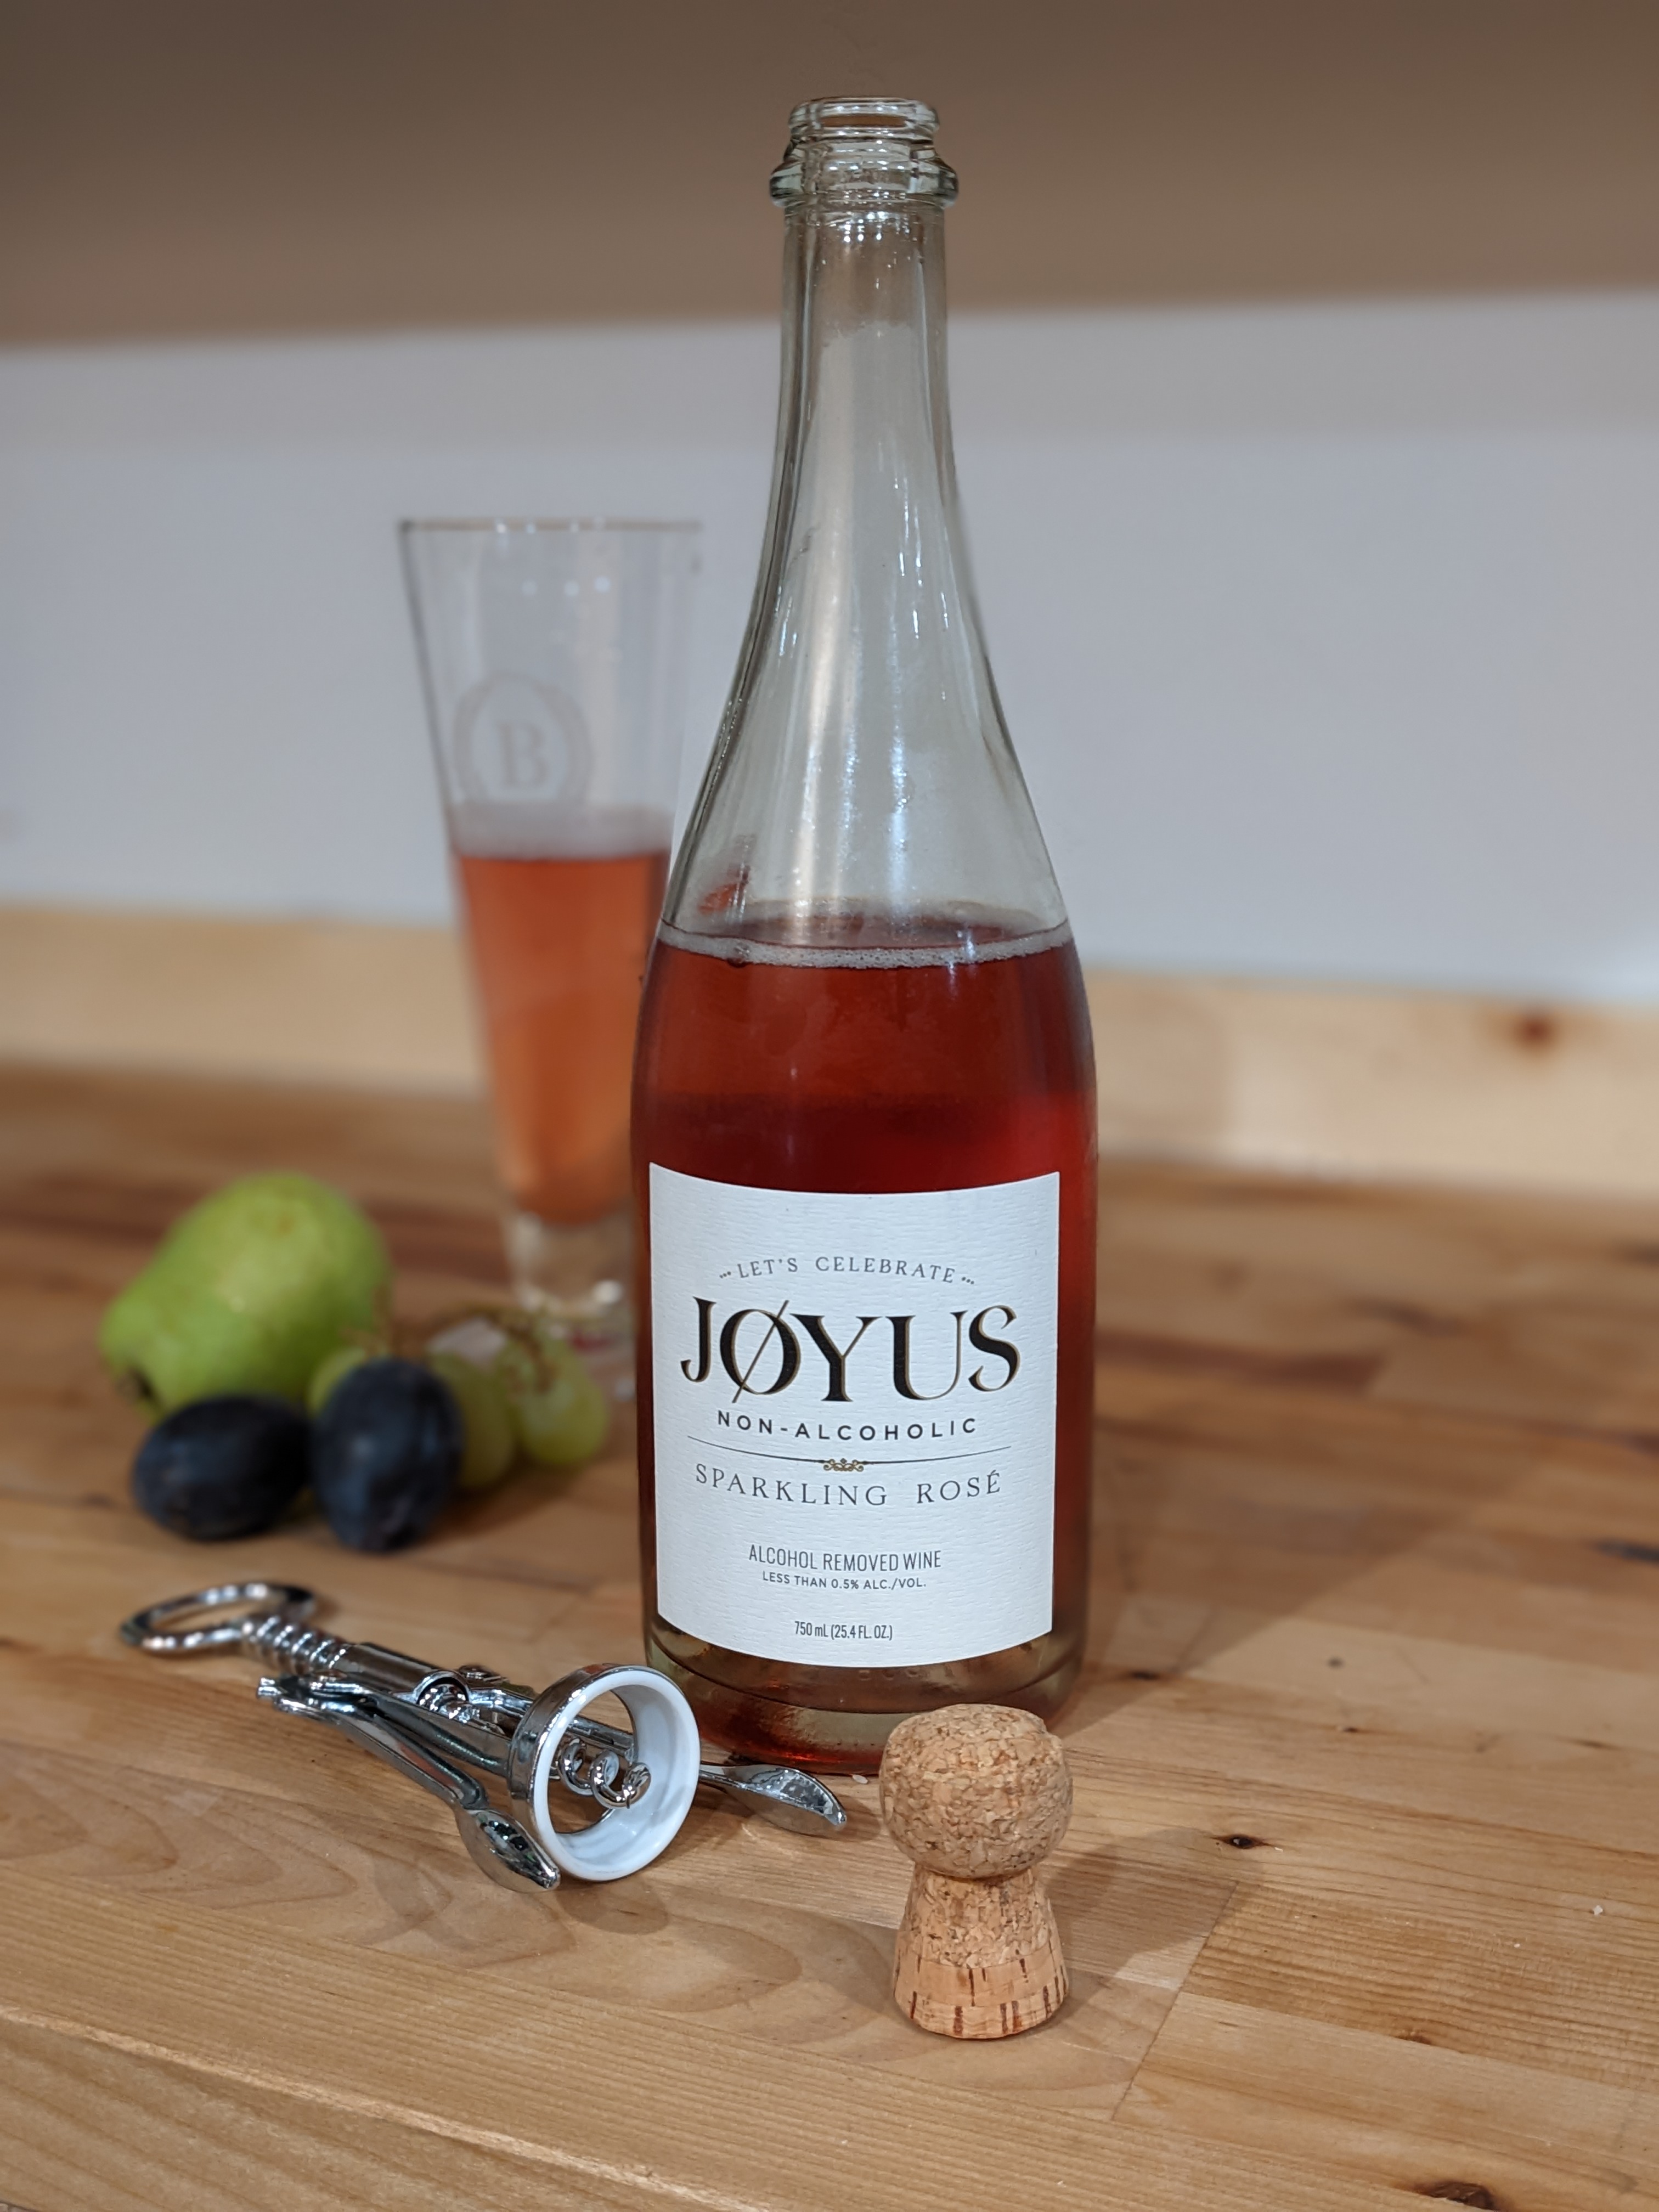 A bottle of sparkling rose wine labeled "JOYUS" sits atop a brown wood countertop next to grapes. 